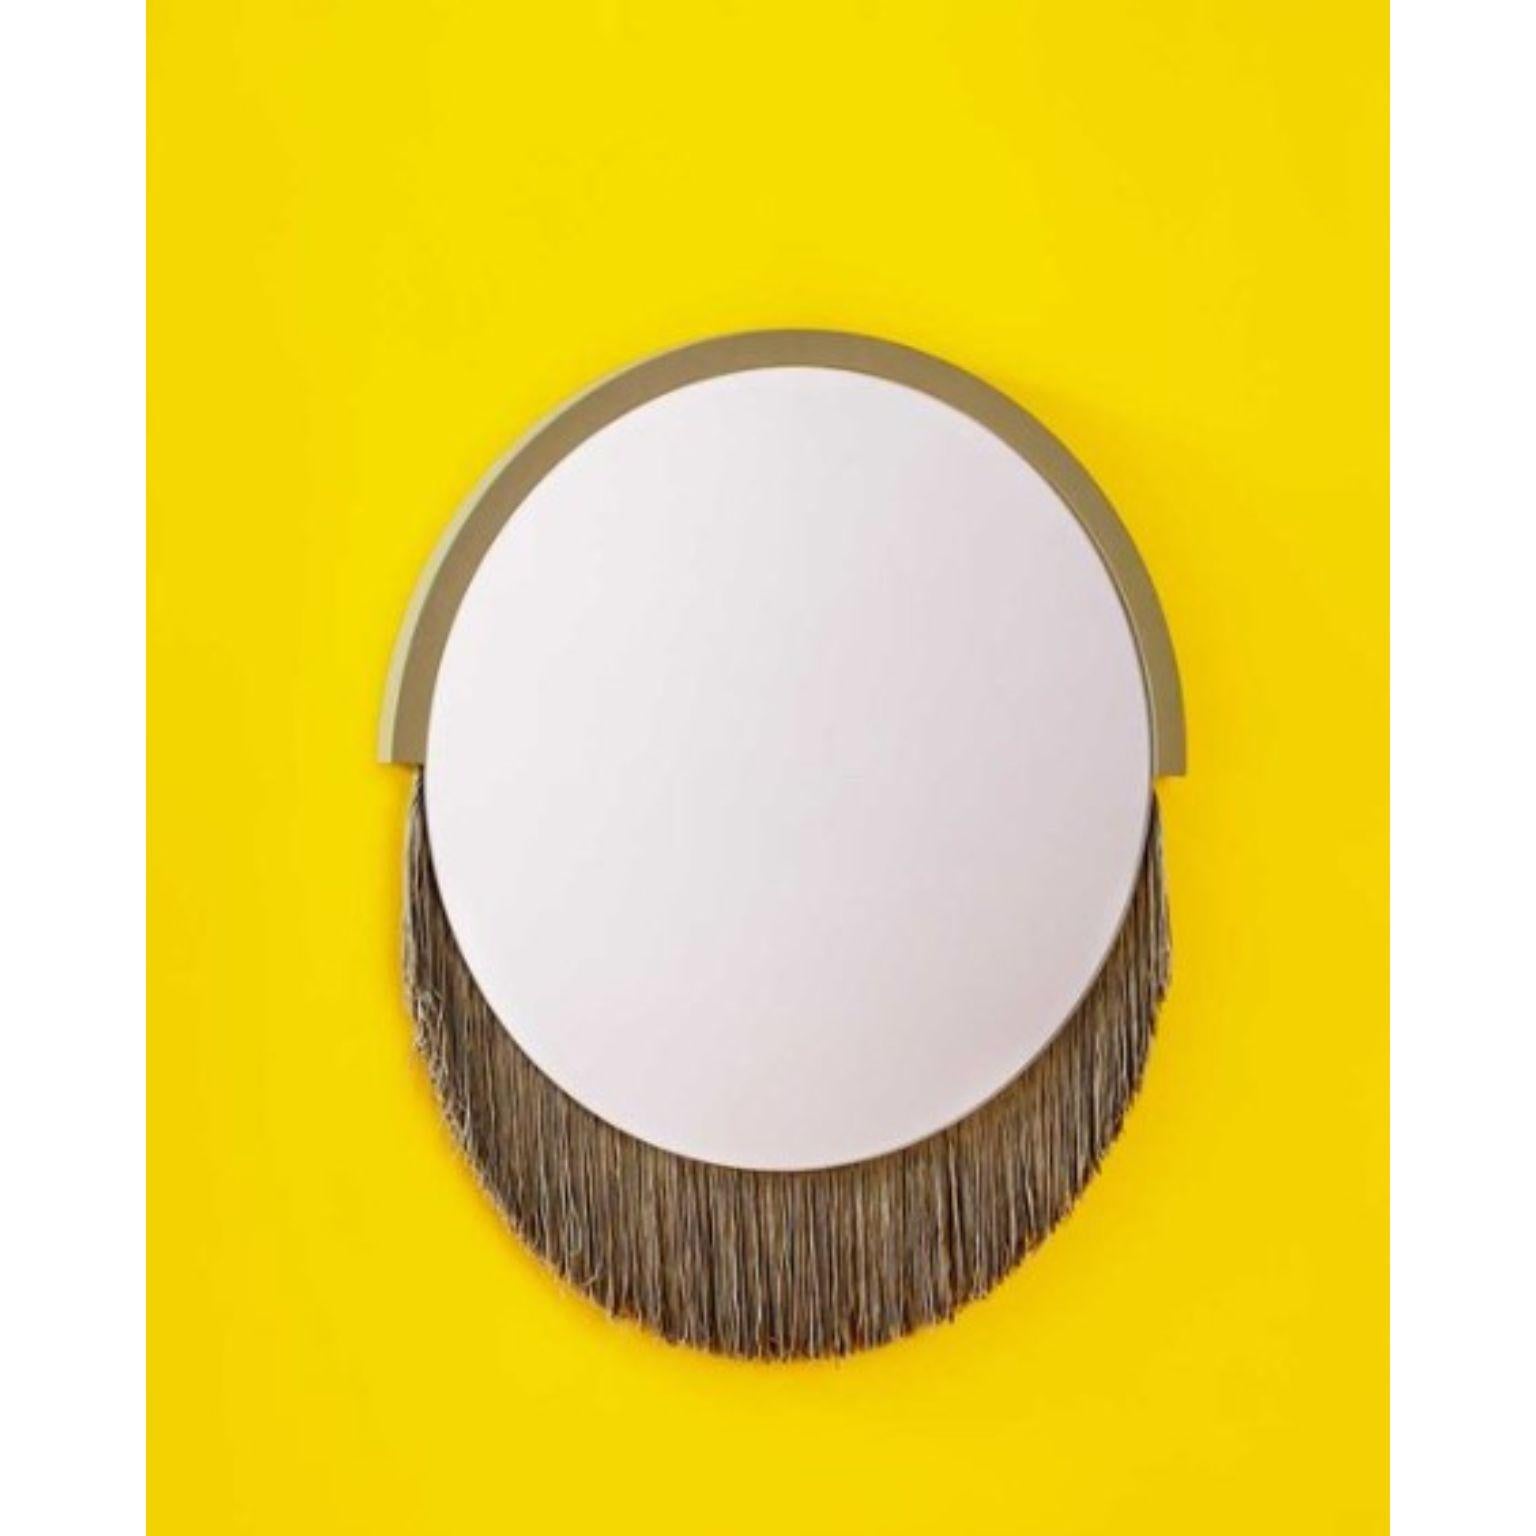 Boudoir small wall mirror by Tero Kuitunen
Material: glass mirror, mdf board, textile fringes.
Dimensions: D38 x W38 x H1.6 cm
Also Available : Different size, models and colors.

Playful wall mirrors with fringe detail.

Designer Tero